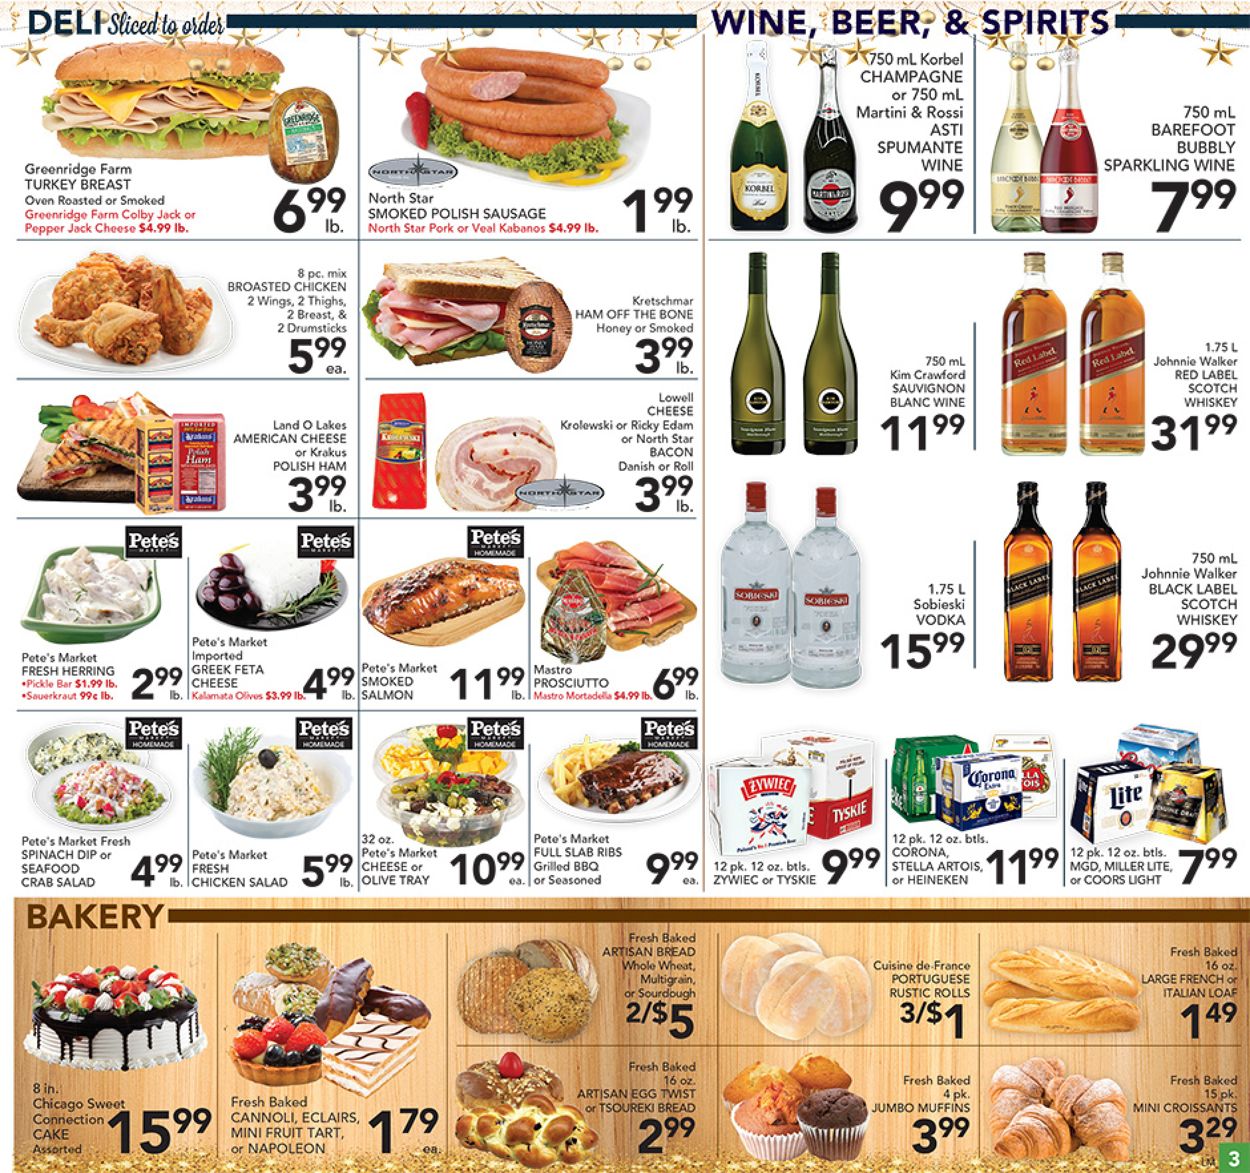 Pete's Fresh Market - New Year's Ad 2019/2020 Weekly Ad Circular - valid 12/26-12/31/2019 (Page 3)